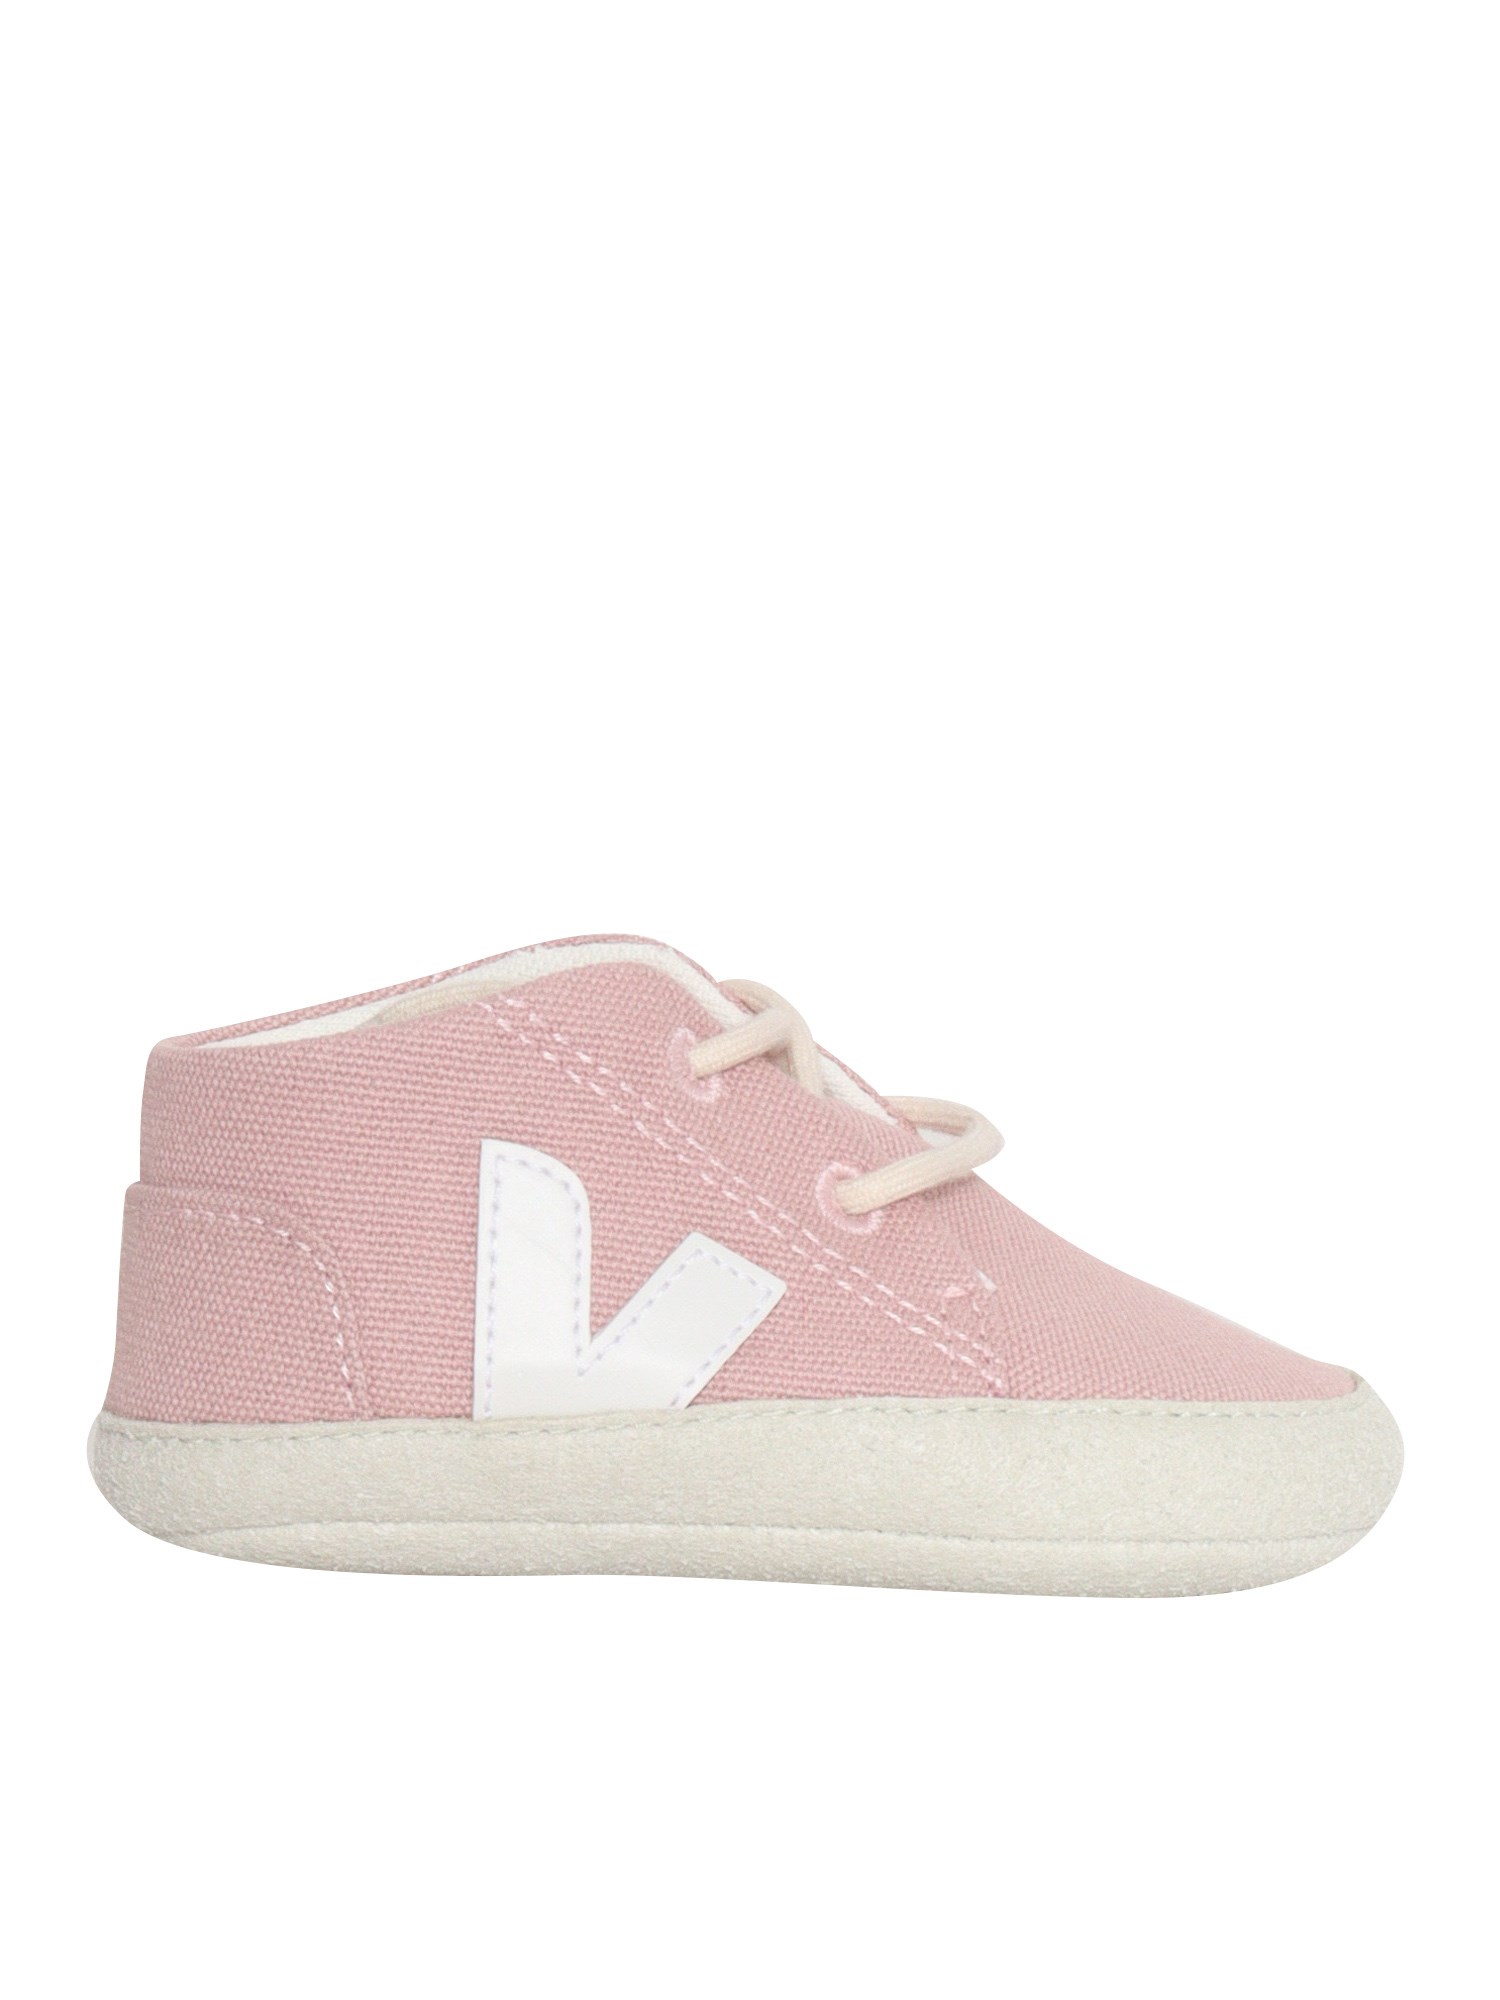 Veja High Pink Sneakers In White